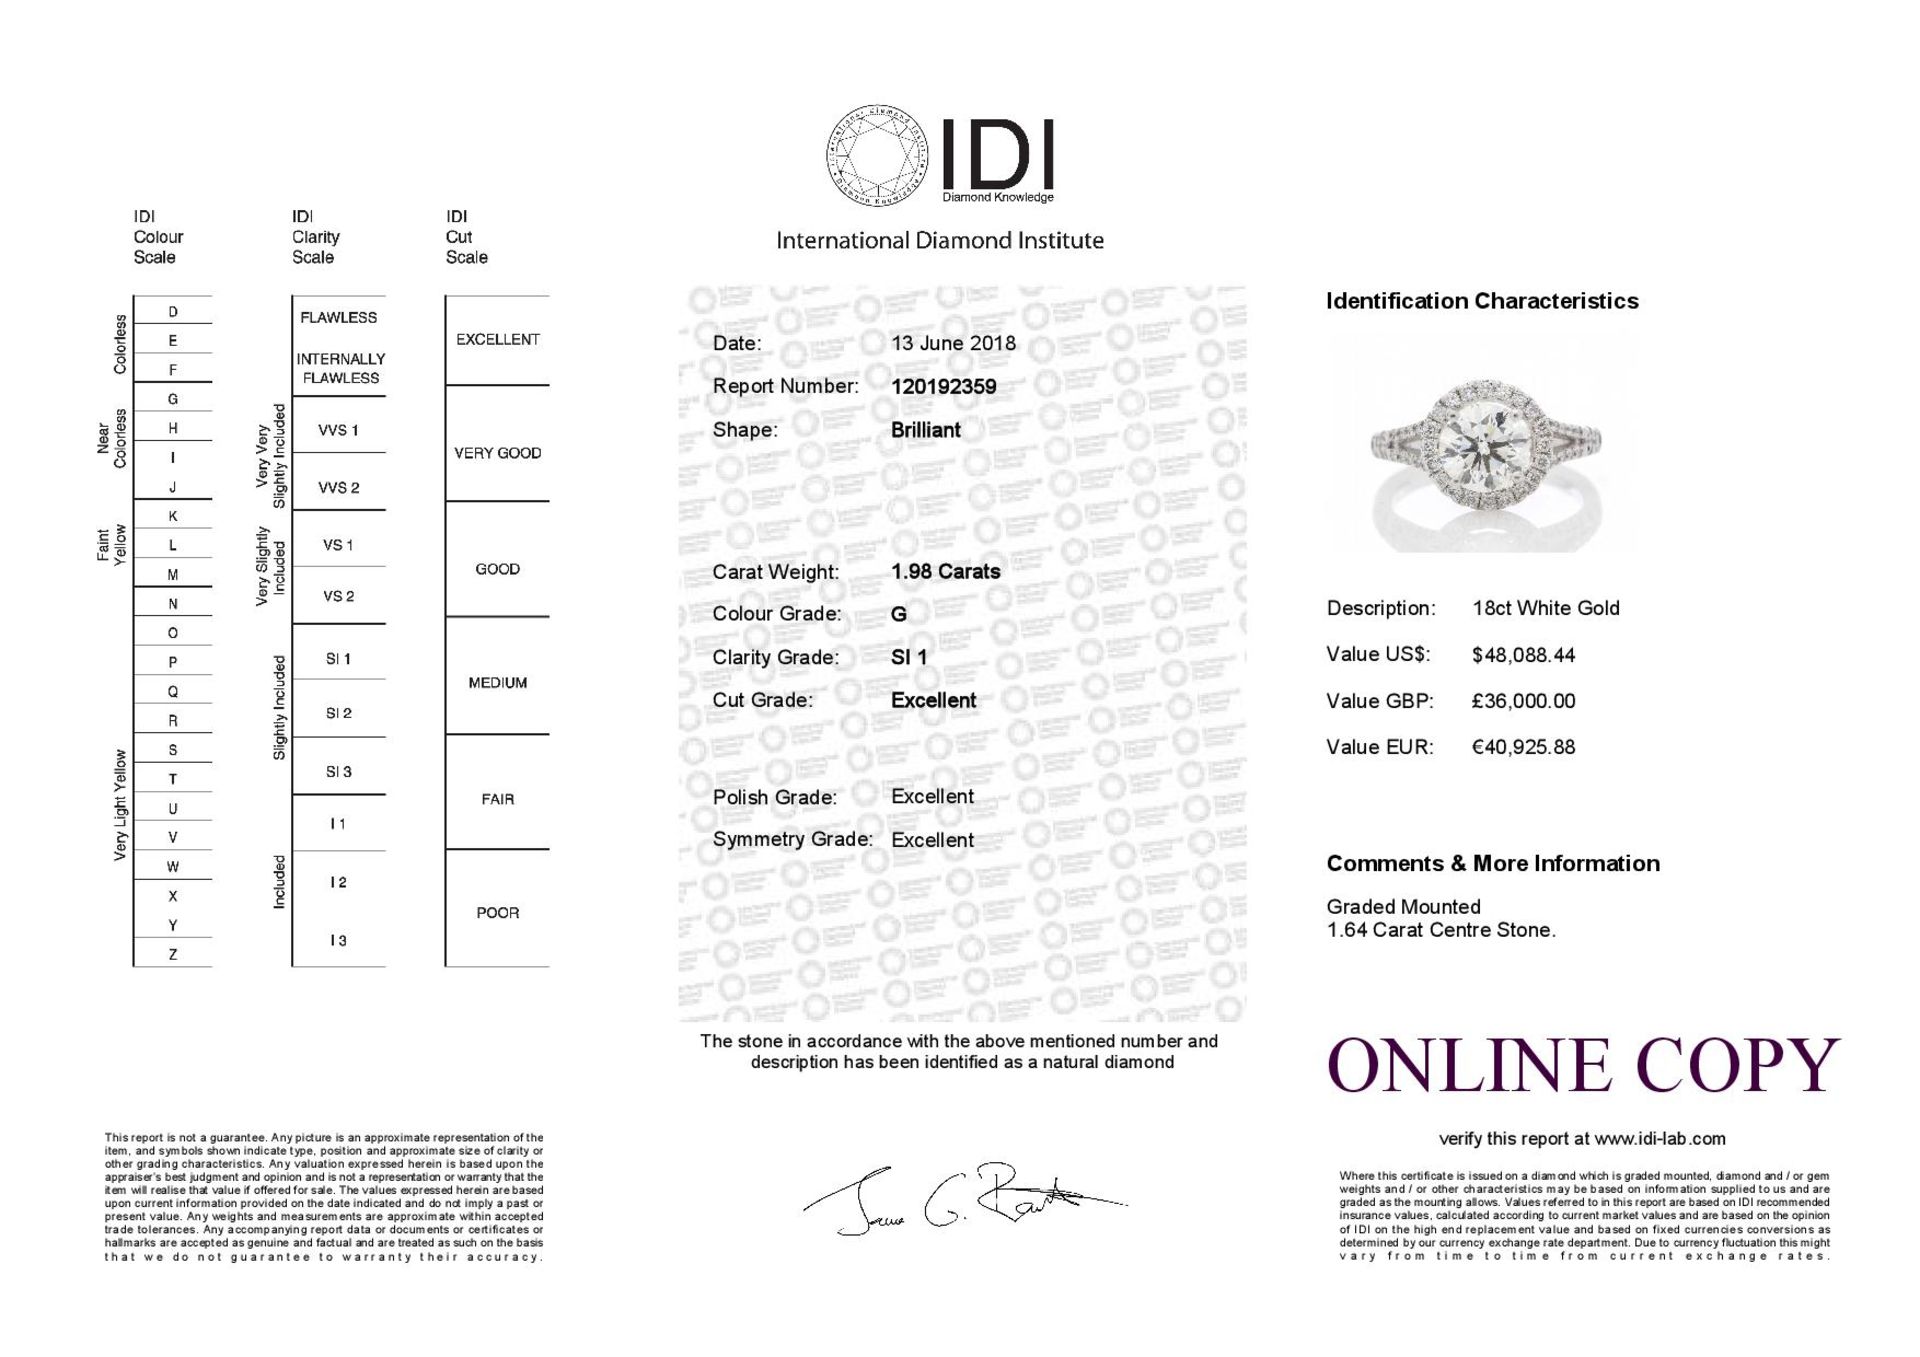 18ct White Gold Single Stone With Halo Setting Ring (1.64) 1.98 Carats - Valued by IDI £36,000. - Image 5 of 5